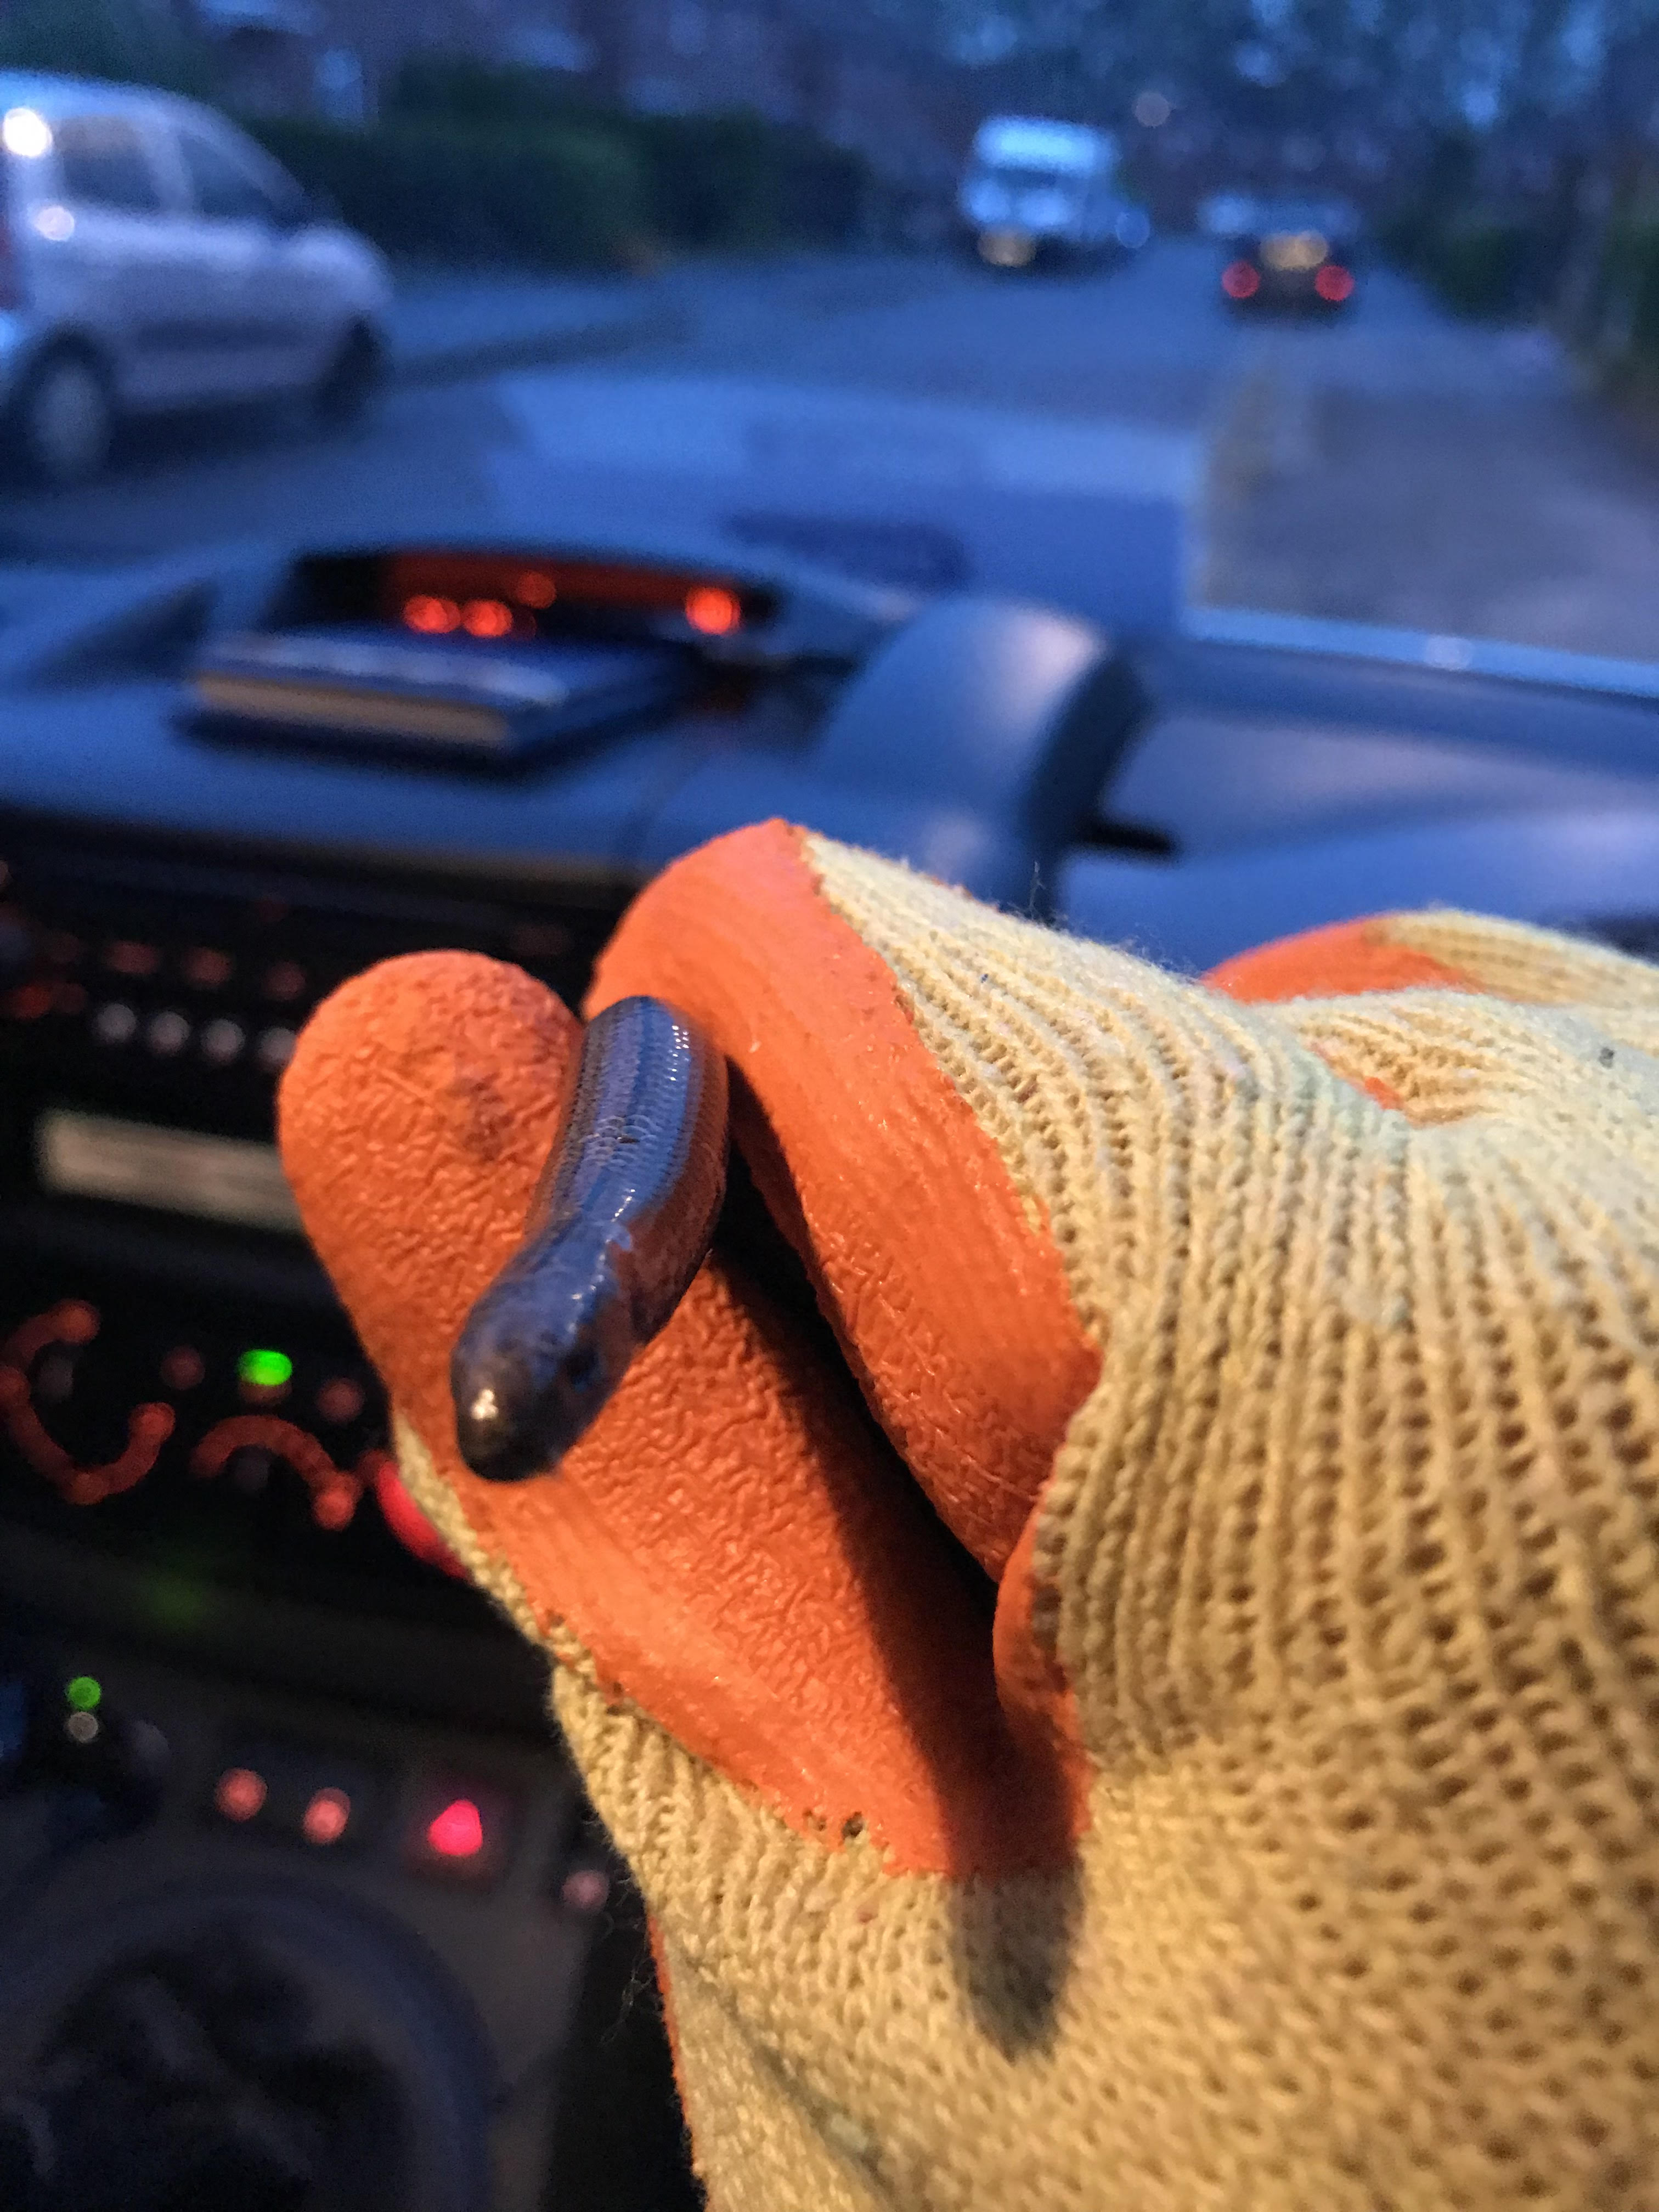 A slow worm held by an RSPCA officer